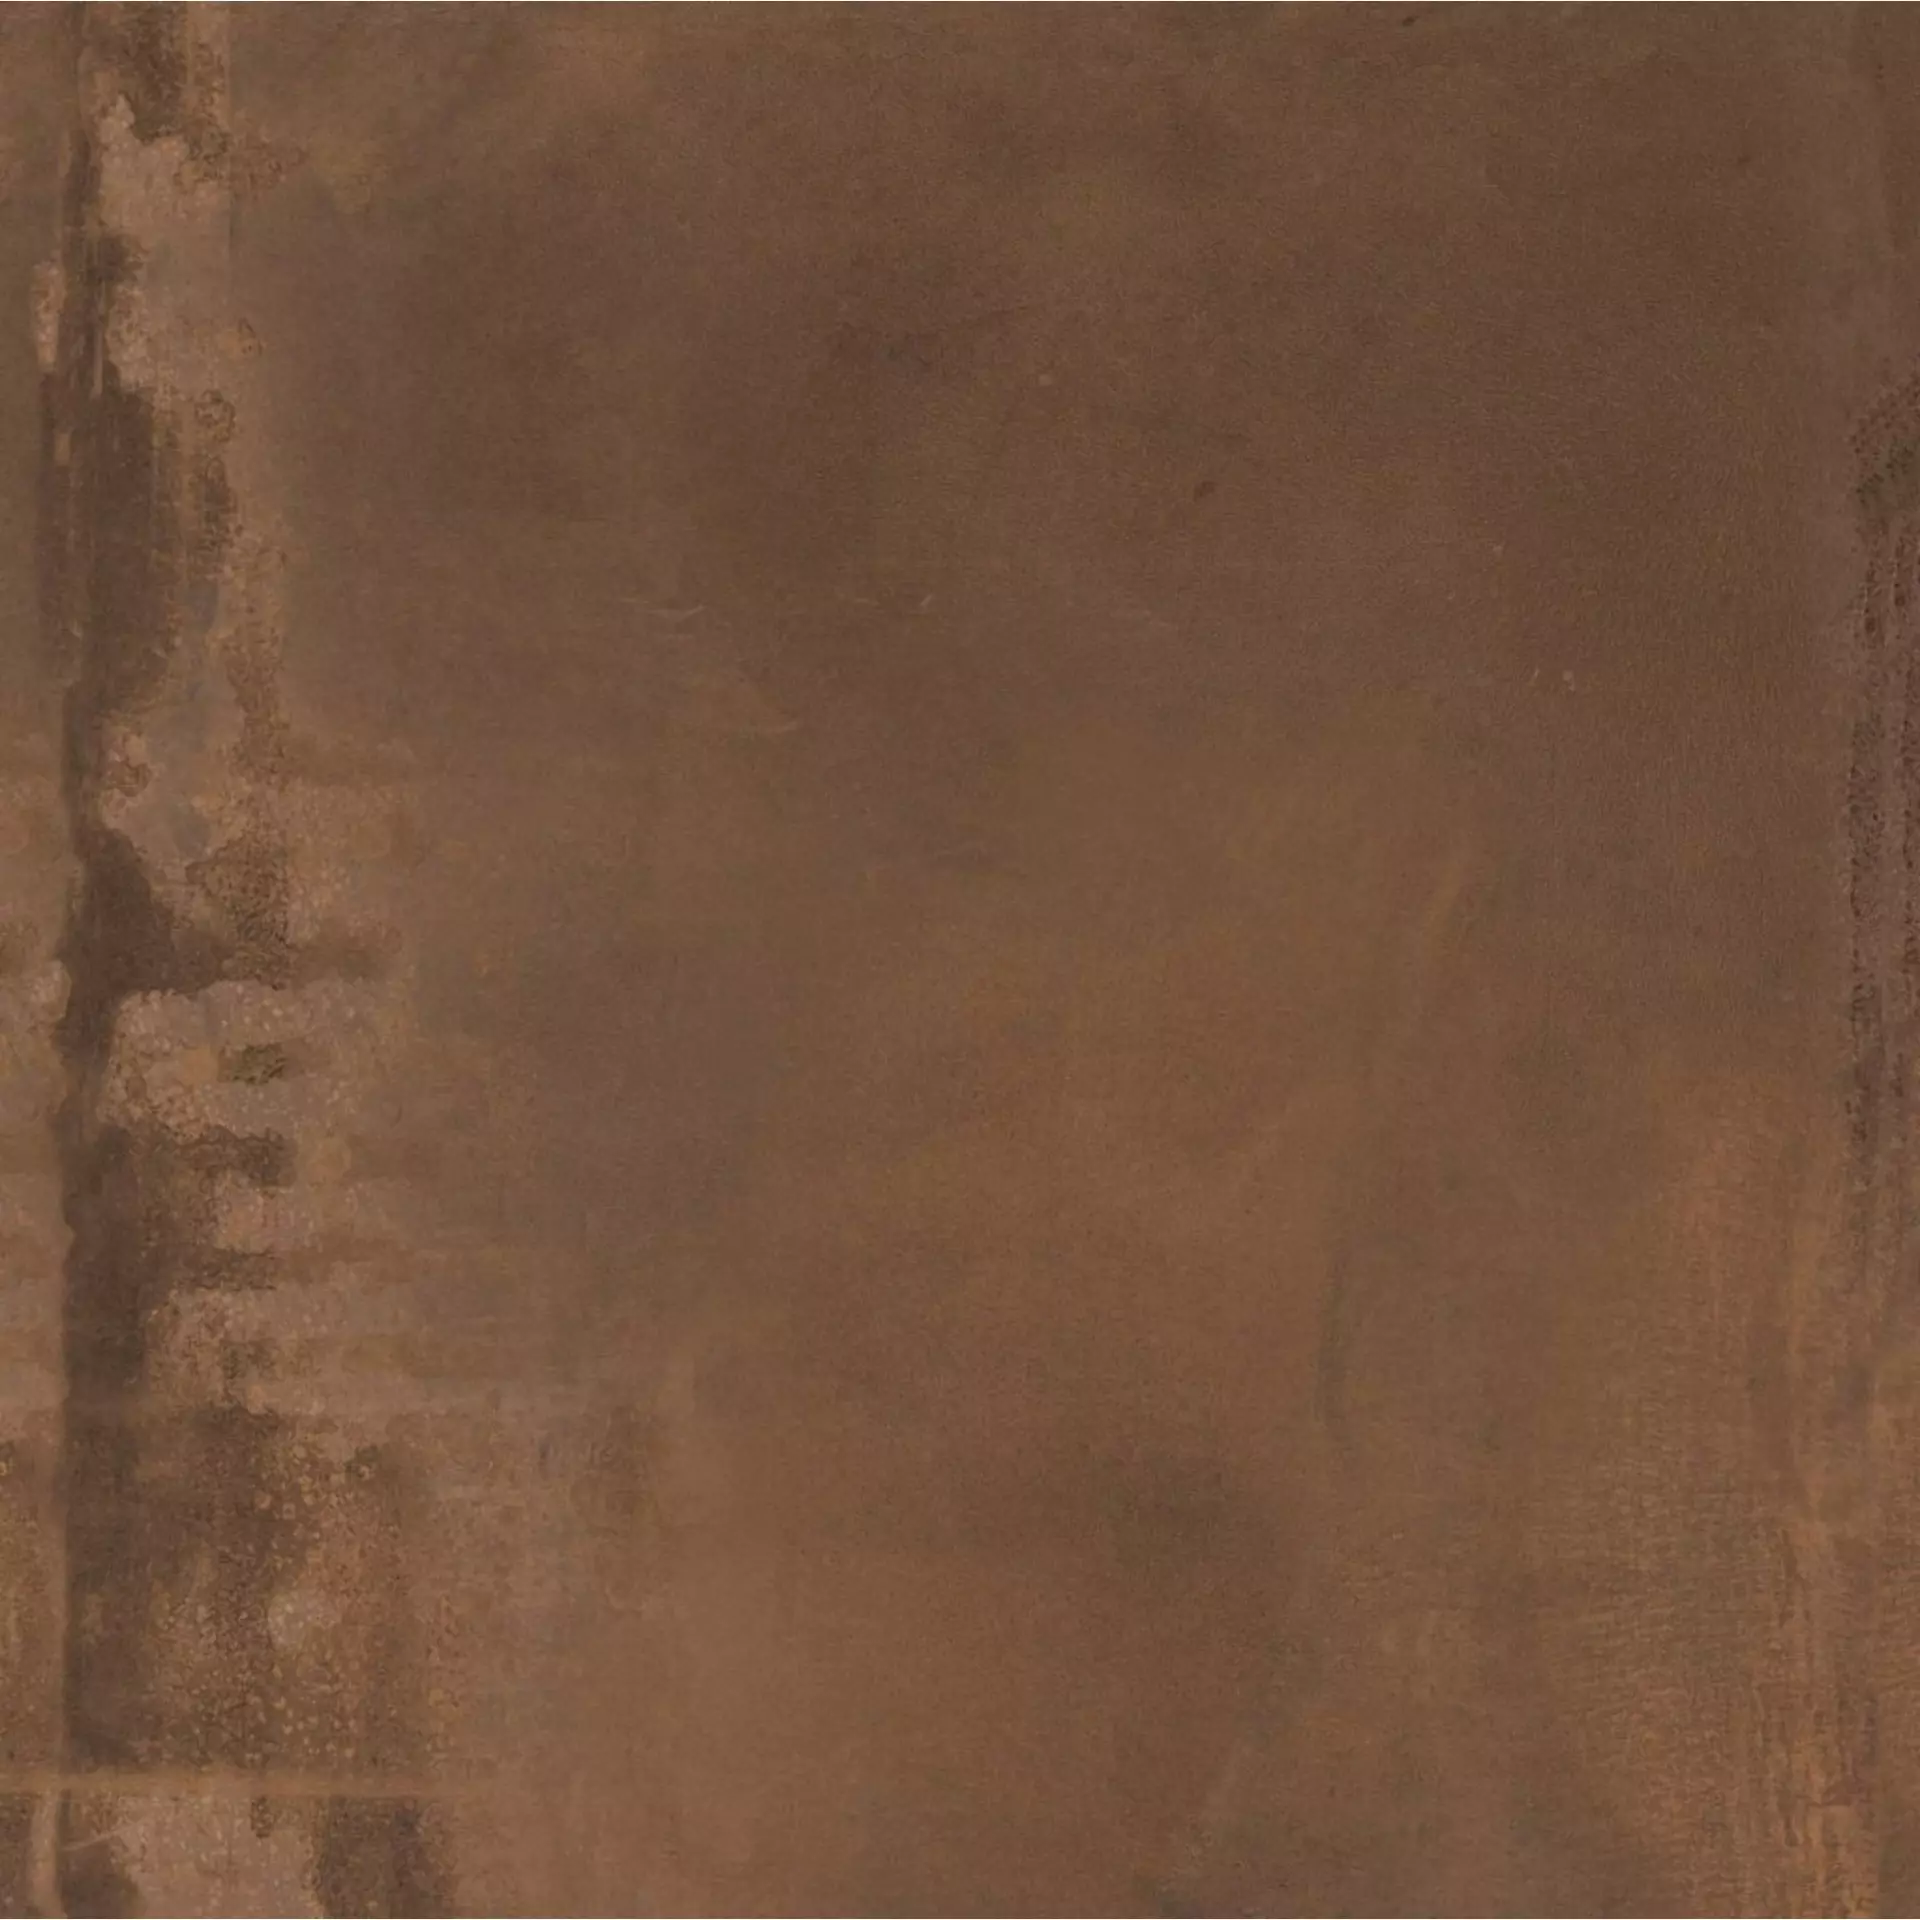 ABK Interno9 Rust Naturale I9R01300 60x60cm rectified 8,5mm